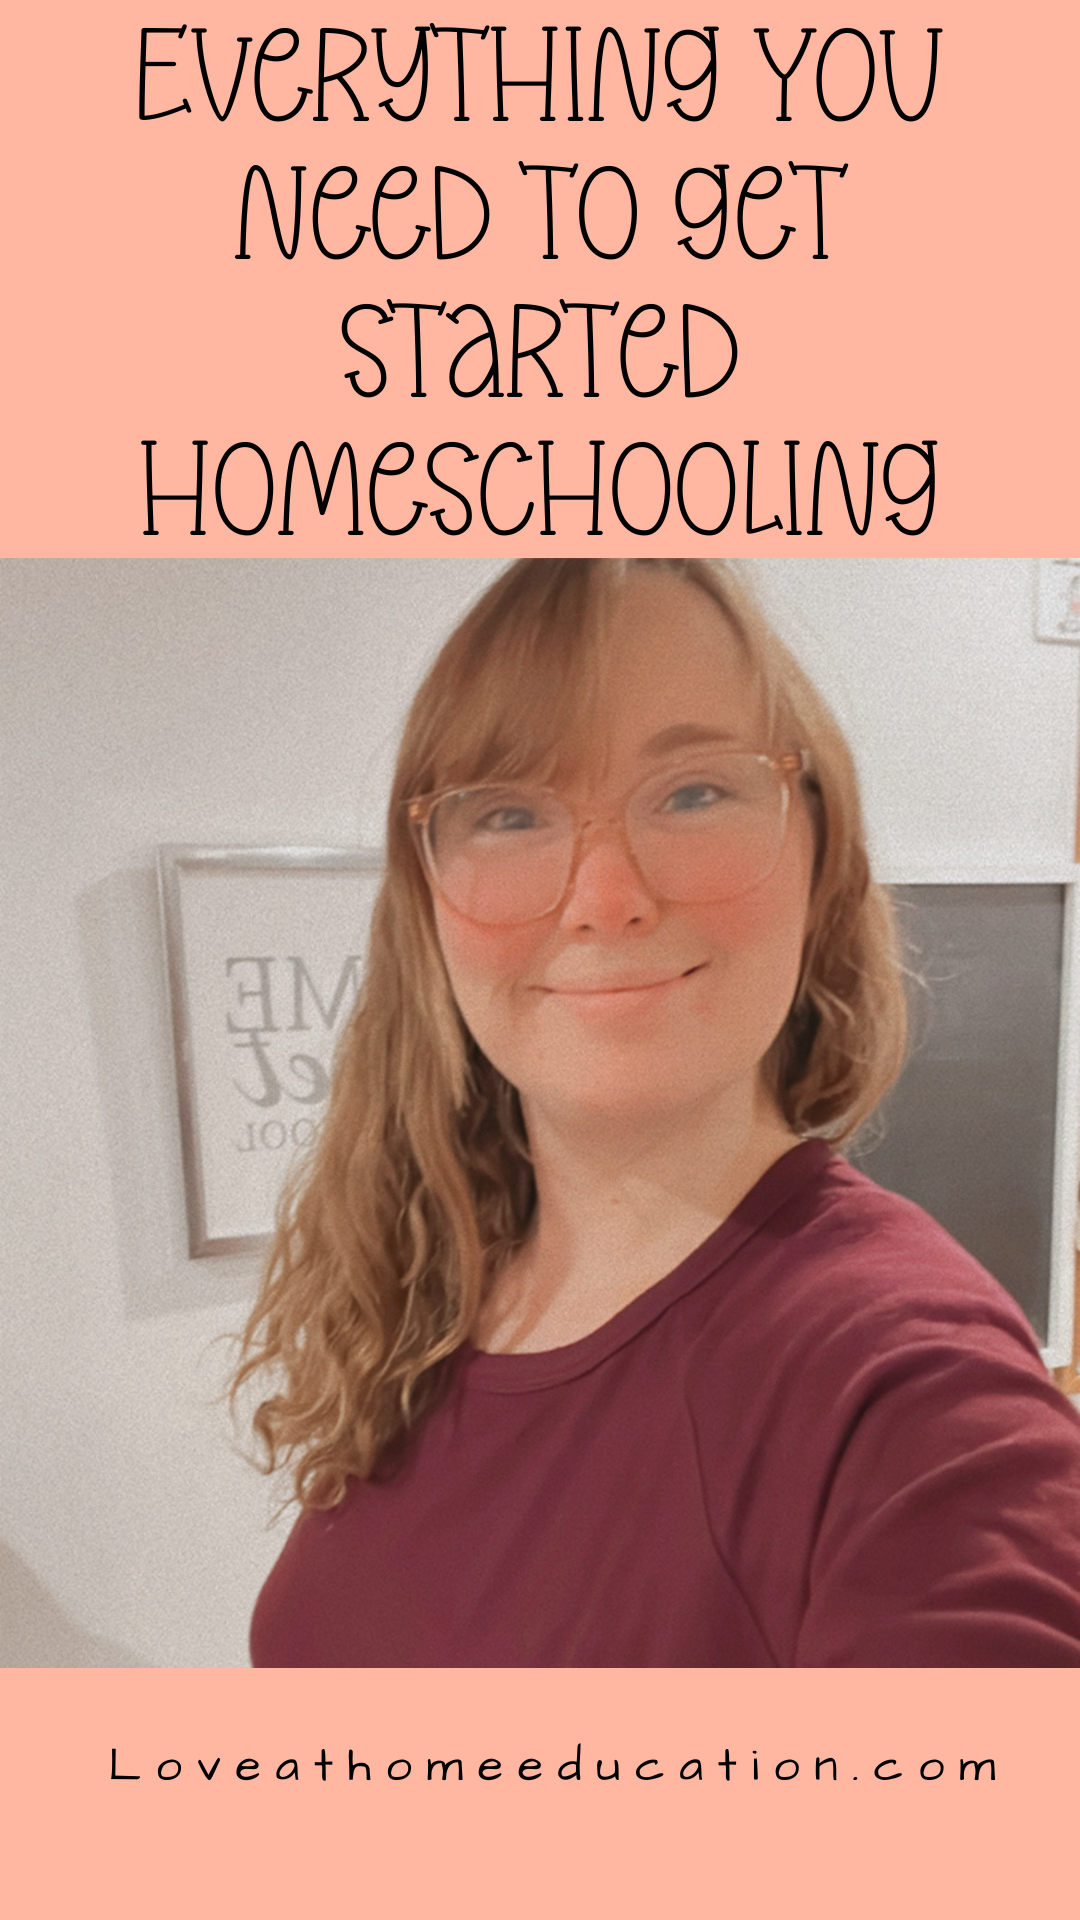 Everything YOU need to get started HOMESCHOOLING!!